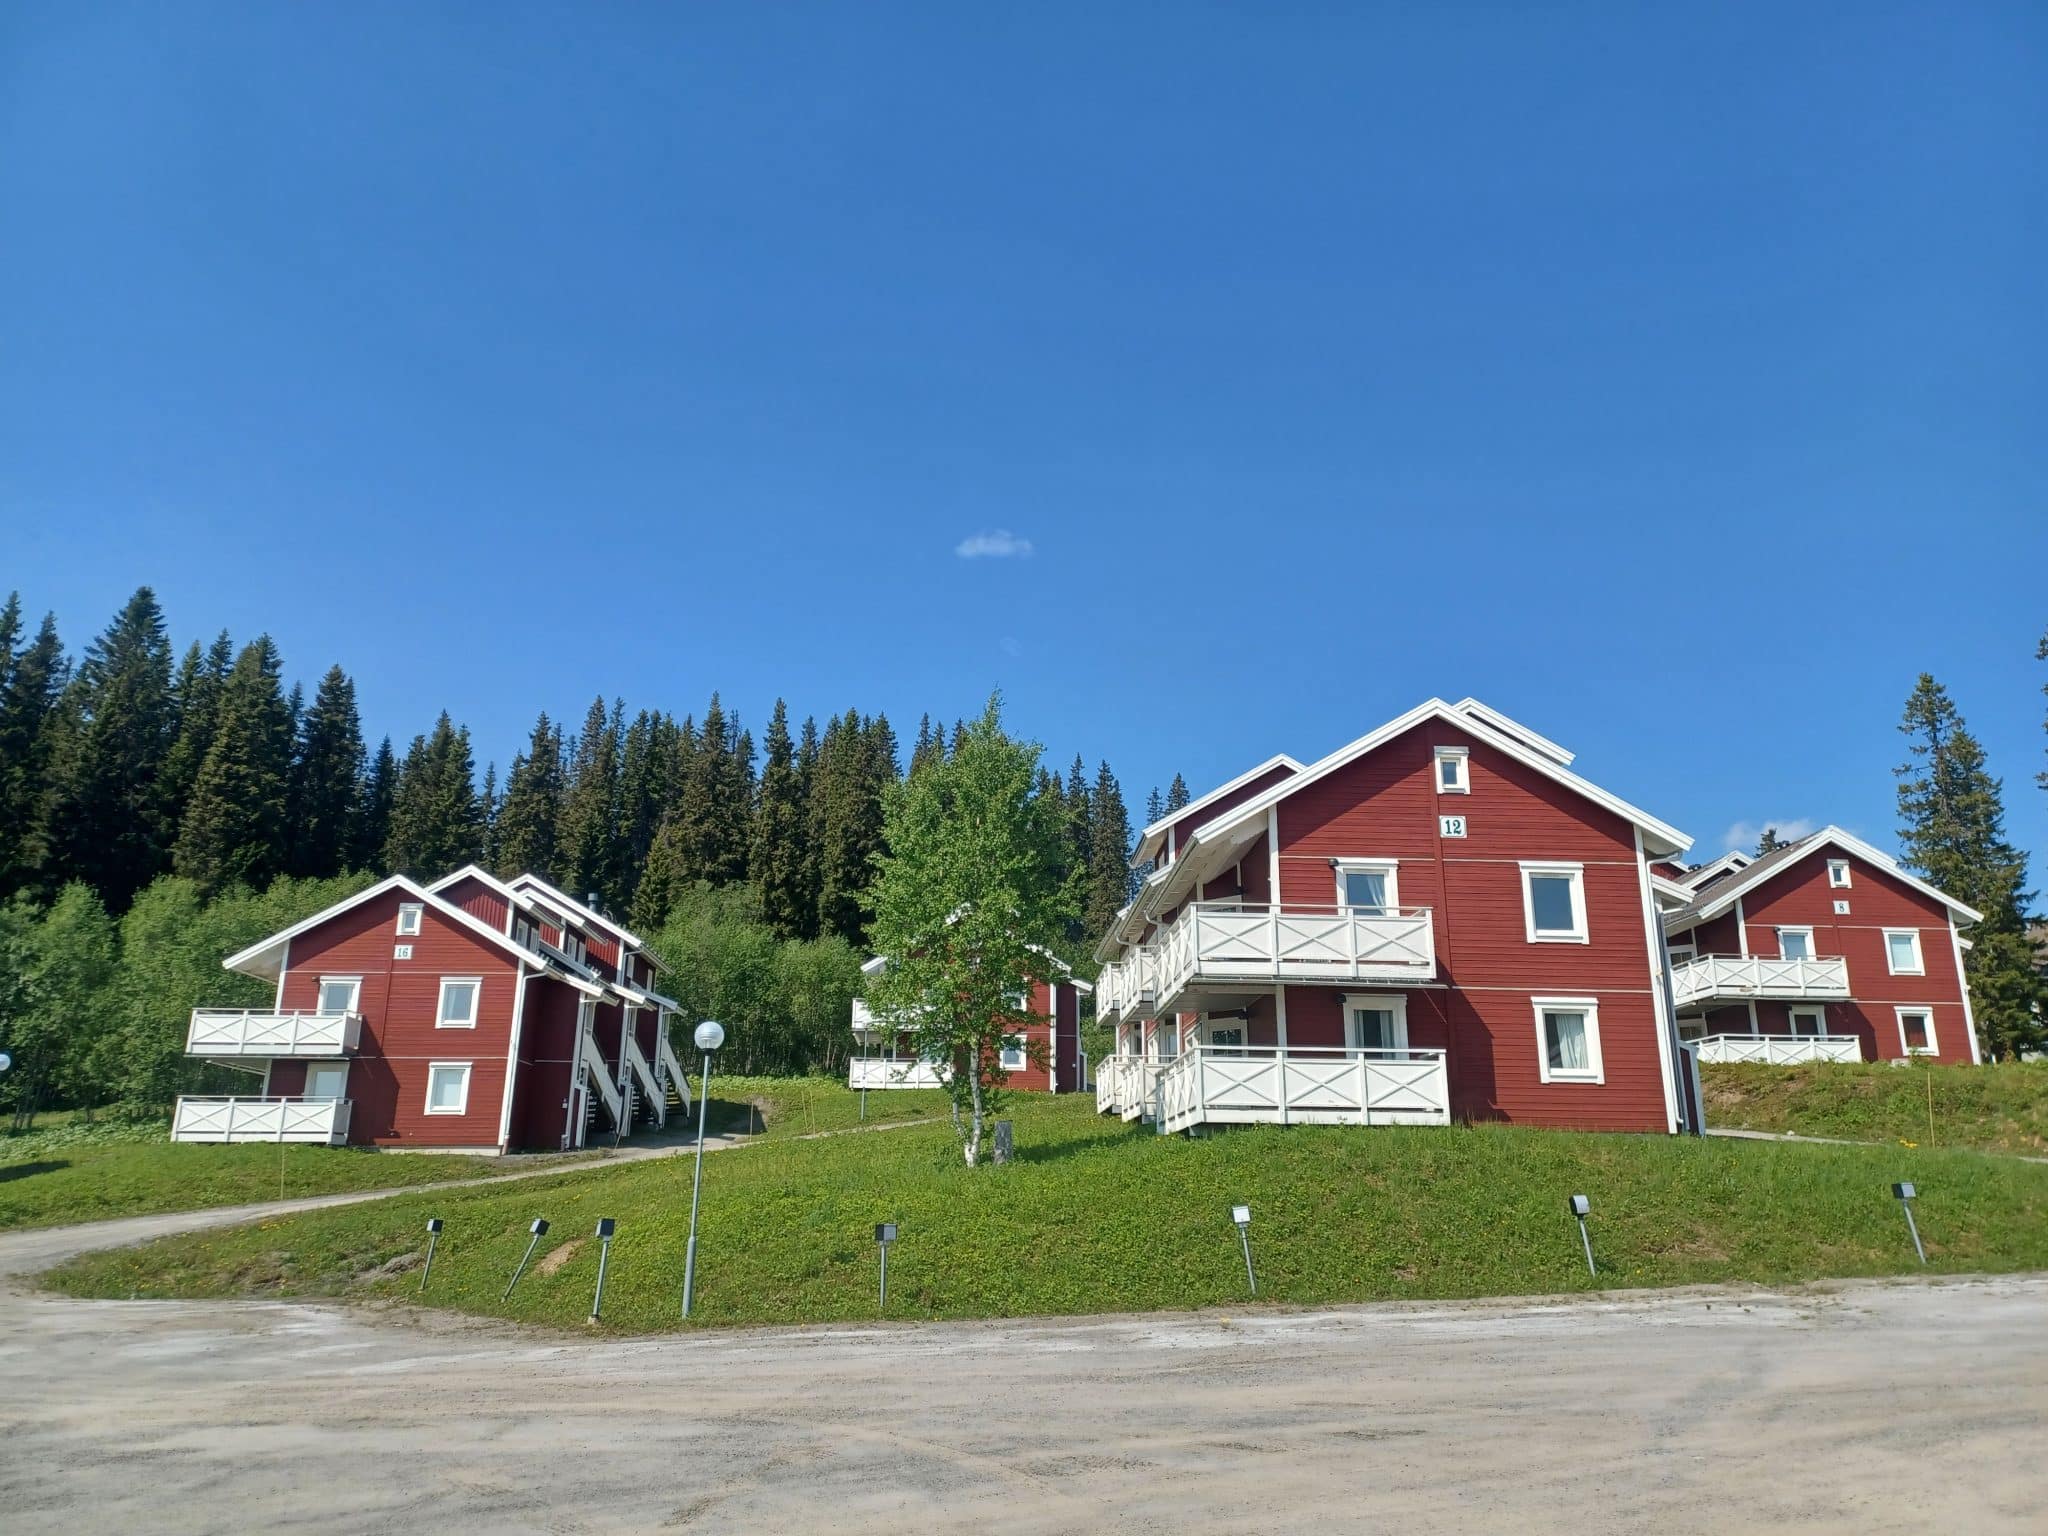 Several red 2 1/2 story houses with white knots, window trim and balcony railings on a large green lawn in front of a green forest and a blue summer sky. in the foreground you can see a gravel field with the property's parking spaces.